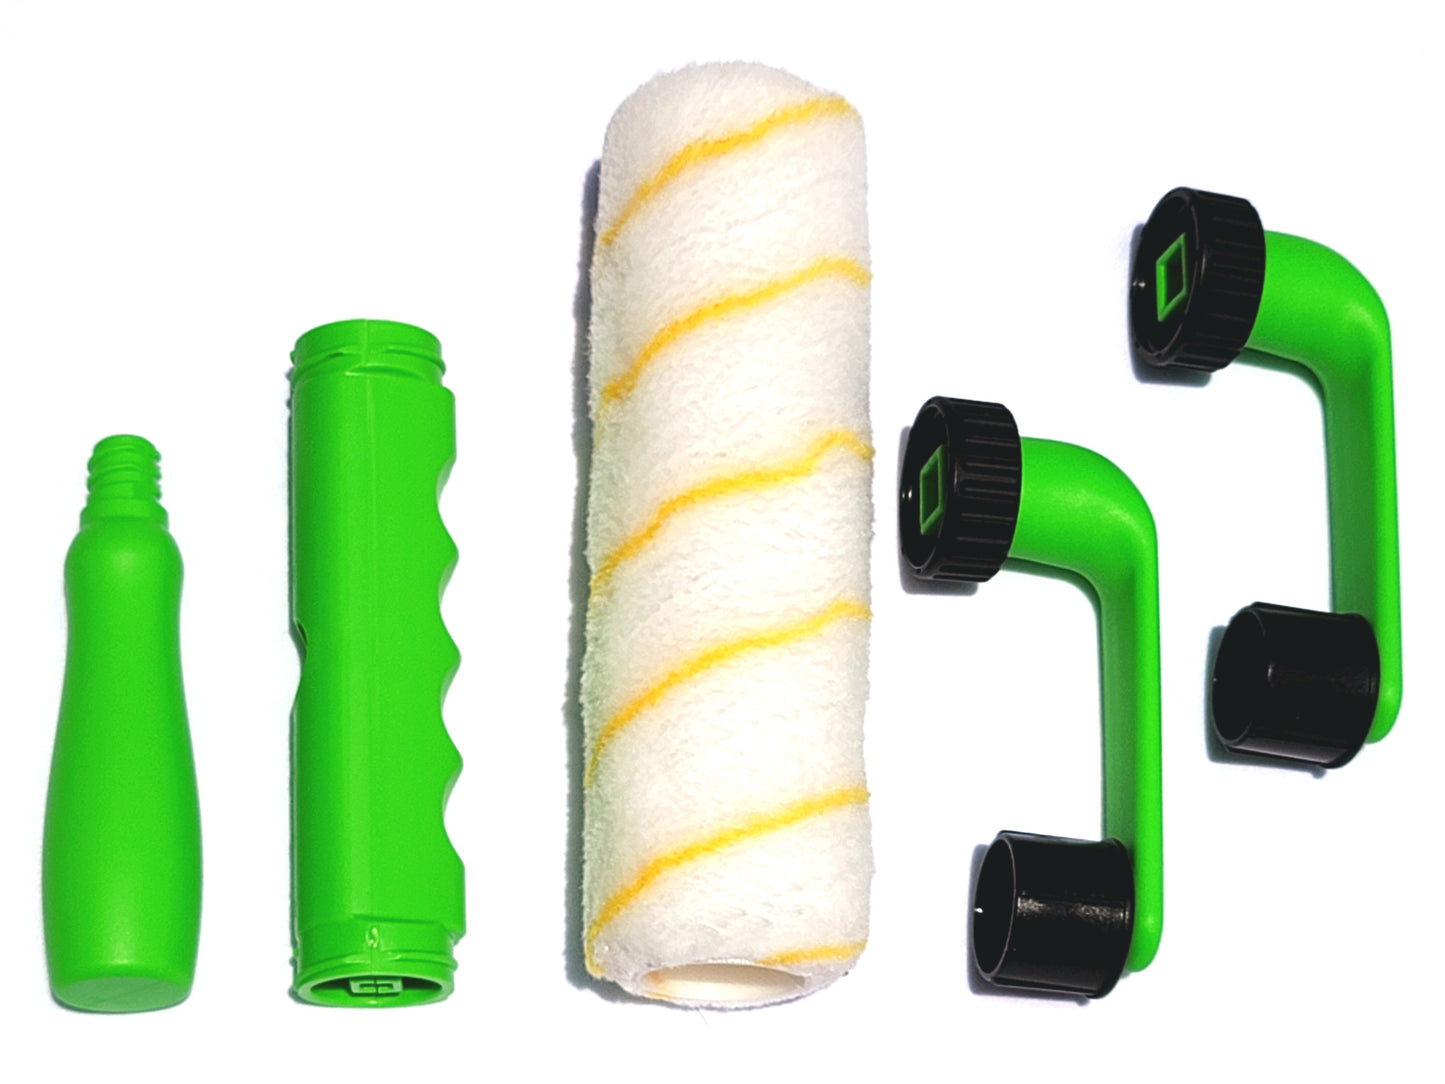 Photo of all components included in the BetterGrip Paint Roller kit, including the main handle, extension handle, 2 arms and a roller cover.